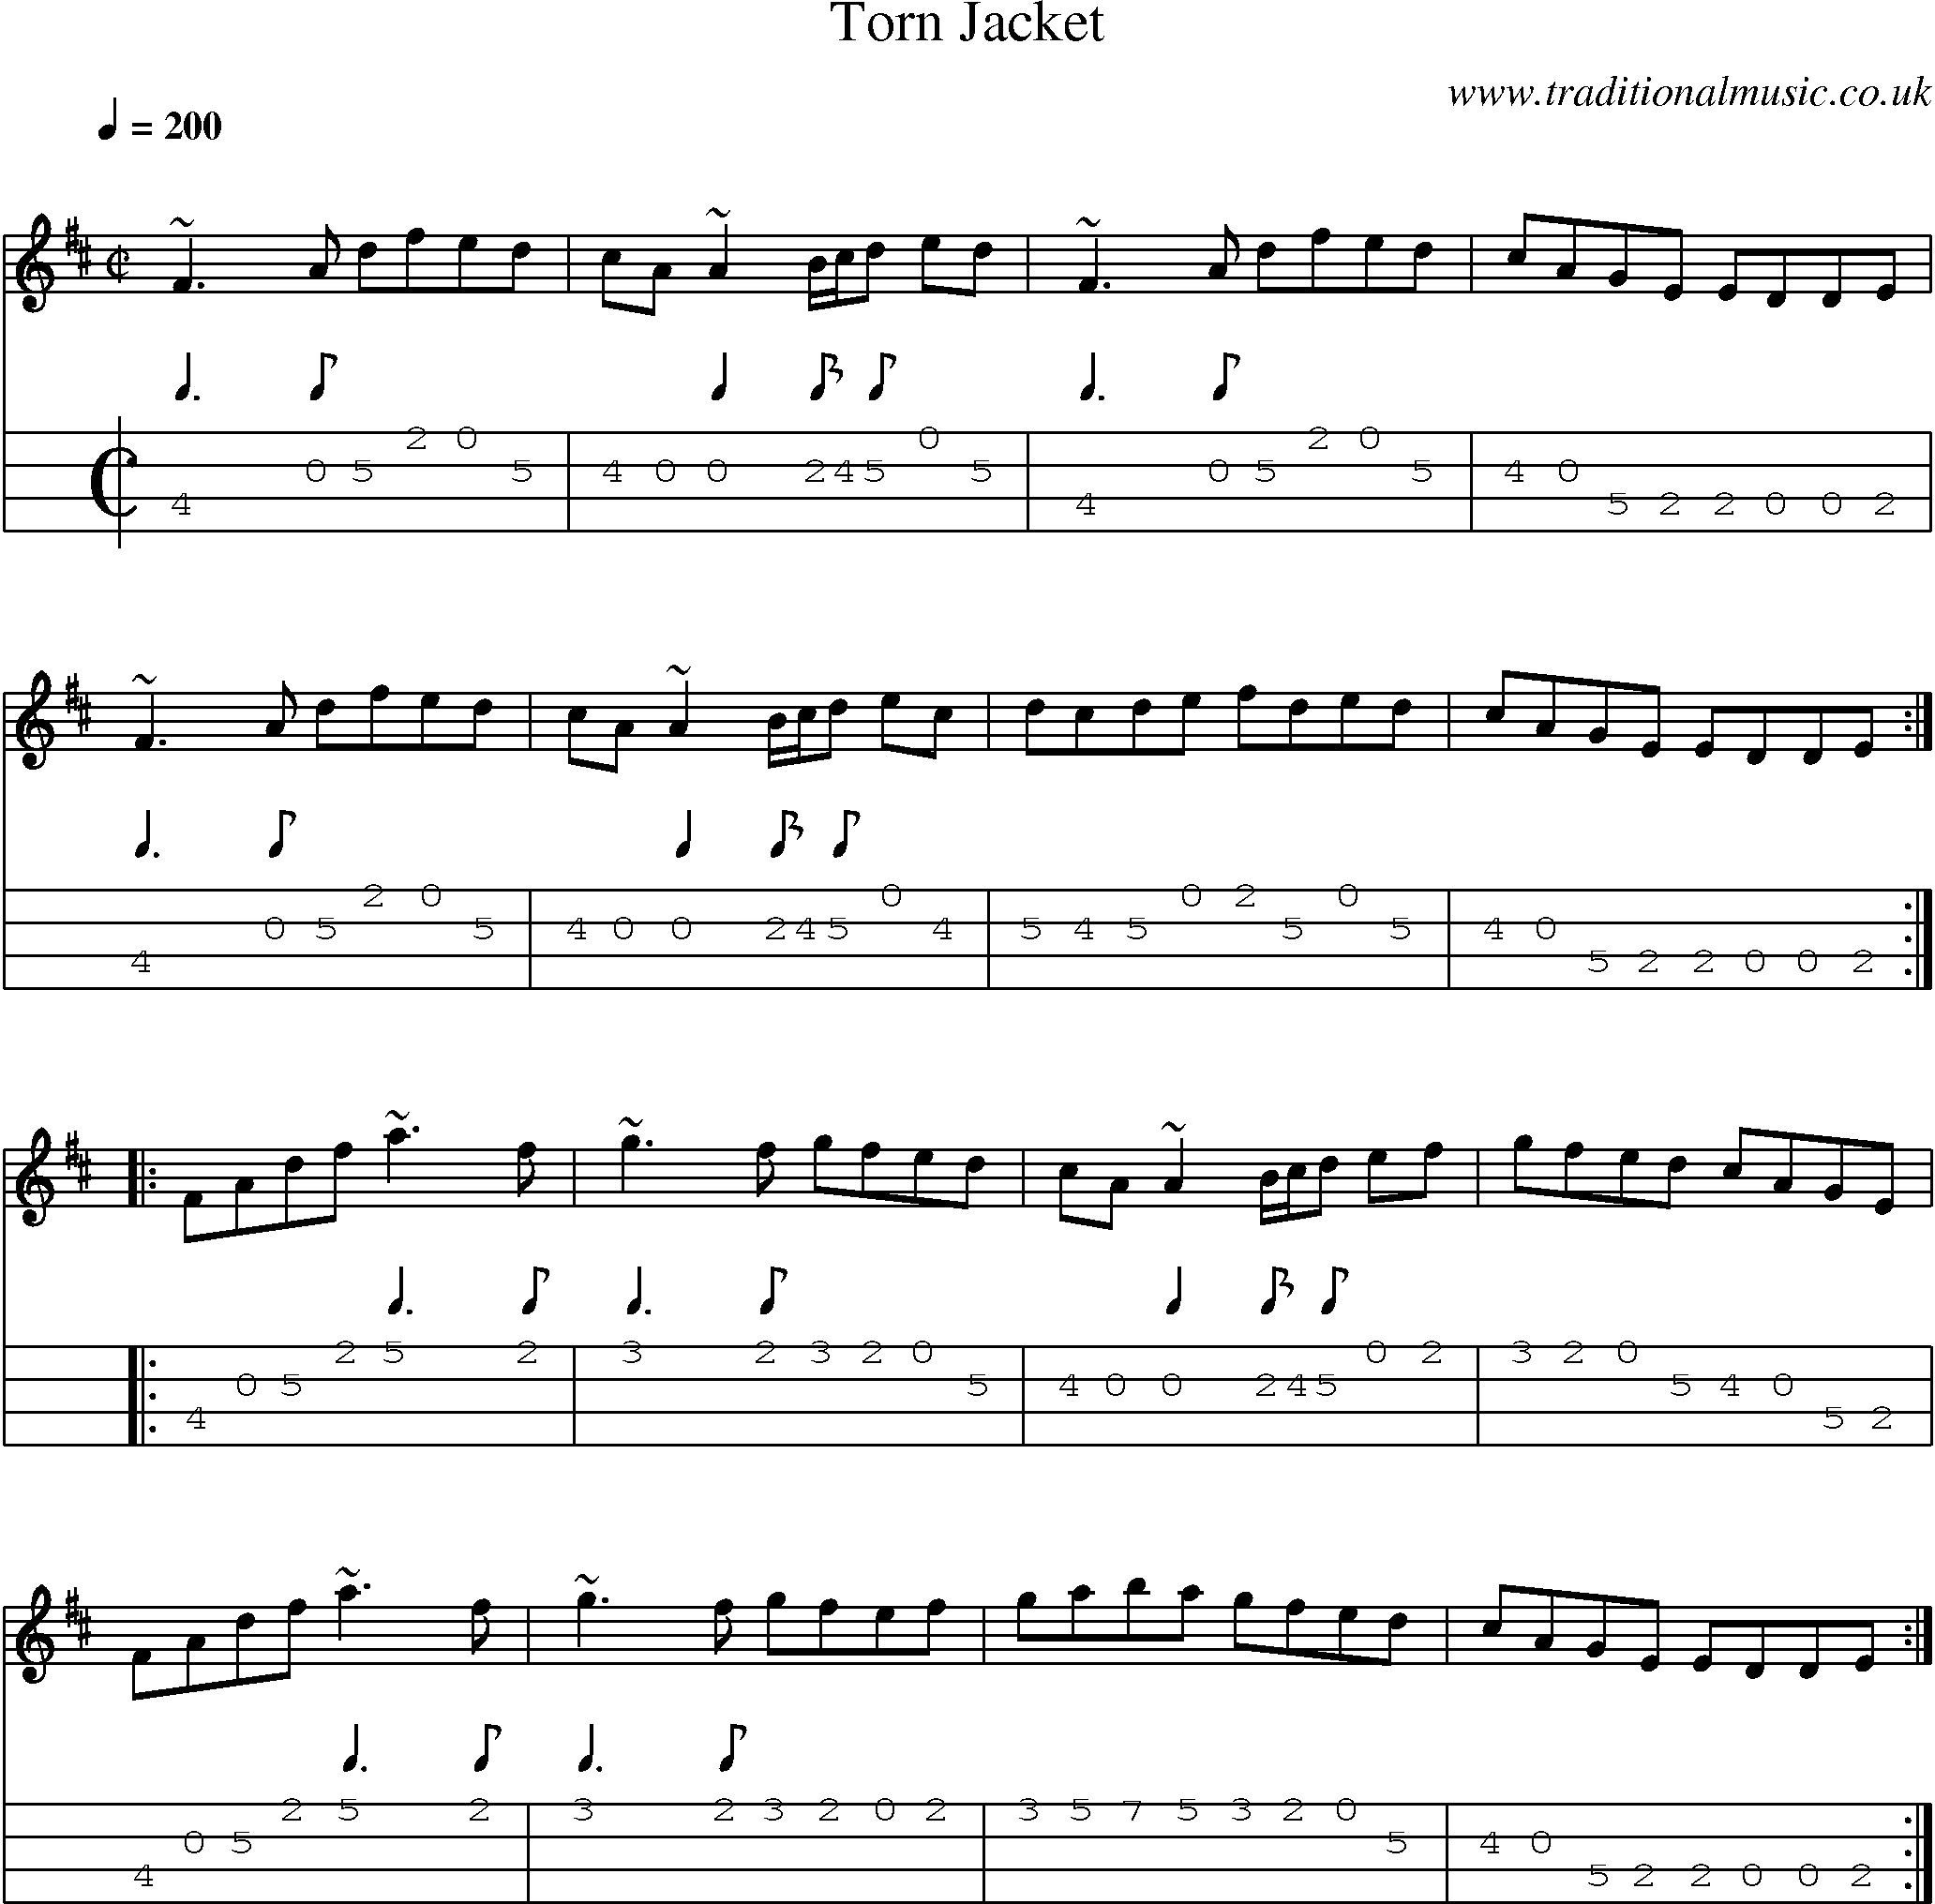 Music Score and Mandolin Tabs for Torn Jacket